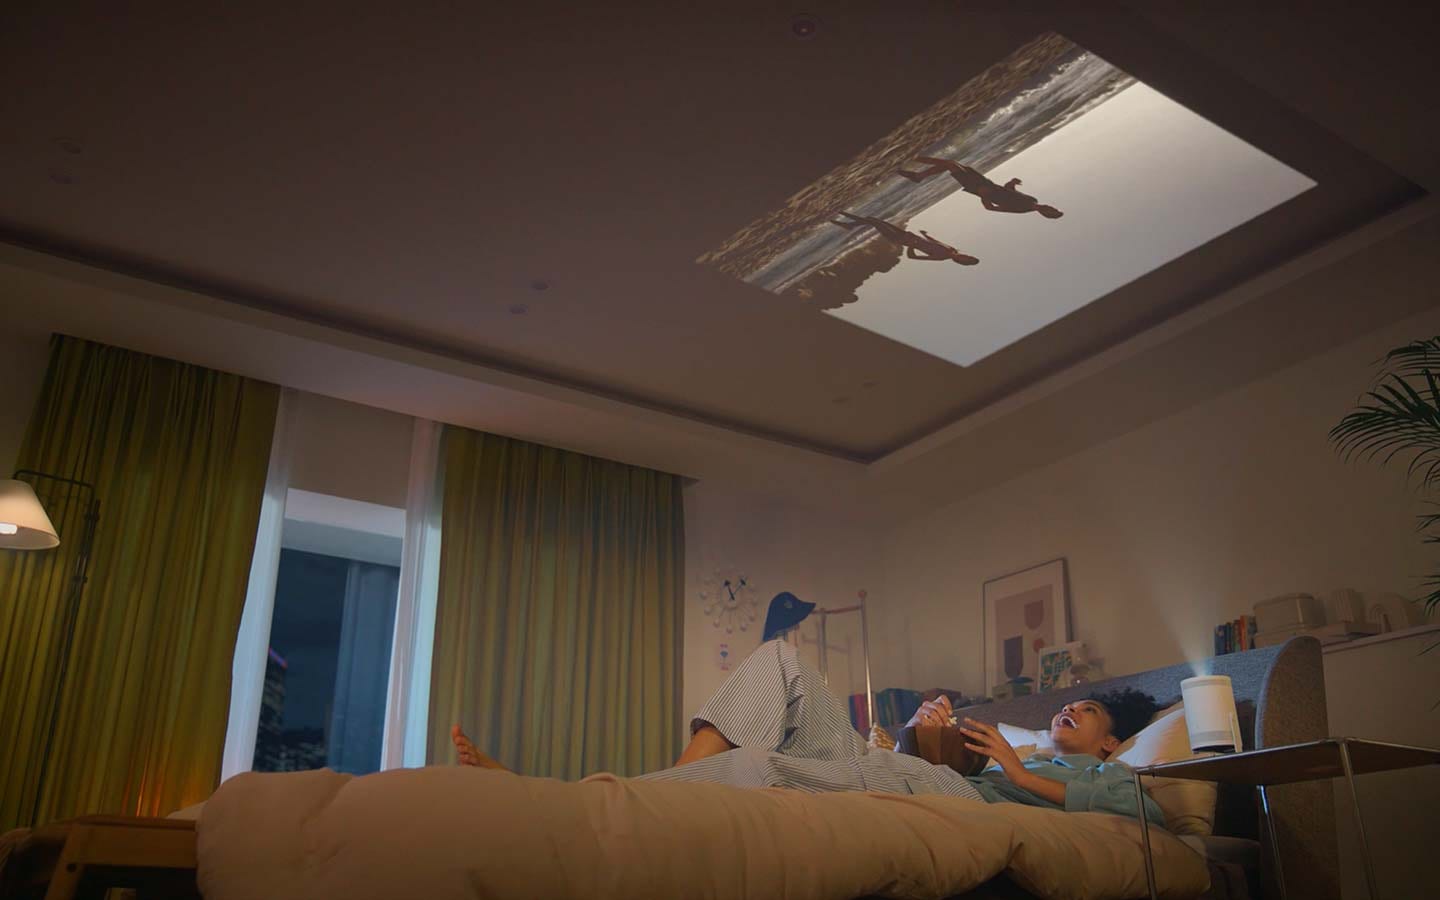 A woman is sitting on her bed eating popcorn, watching a video The Freestyle is projecting onto the wall in front of bed. Then she tilts The Freestyle so it points upwards and lays back with her head on the pillow, continuing to enjoying the video that’s now projected onto the ceiling.